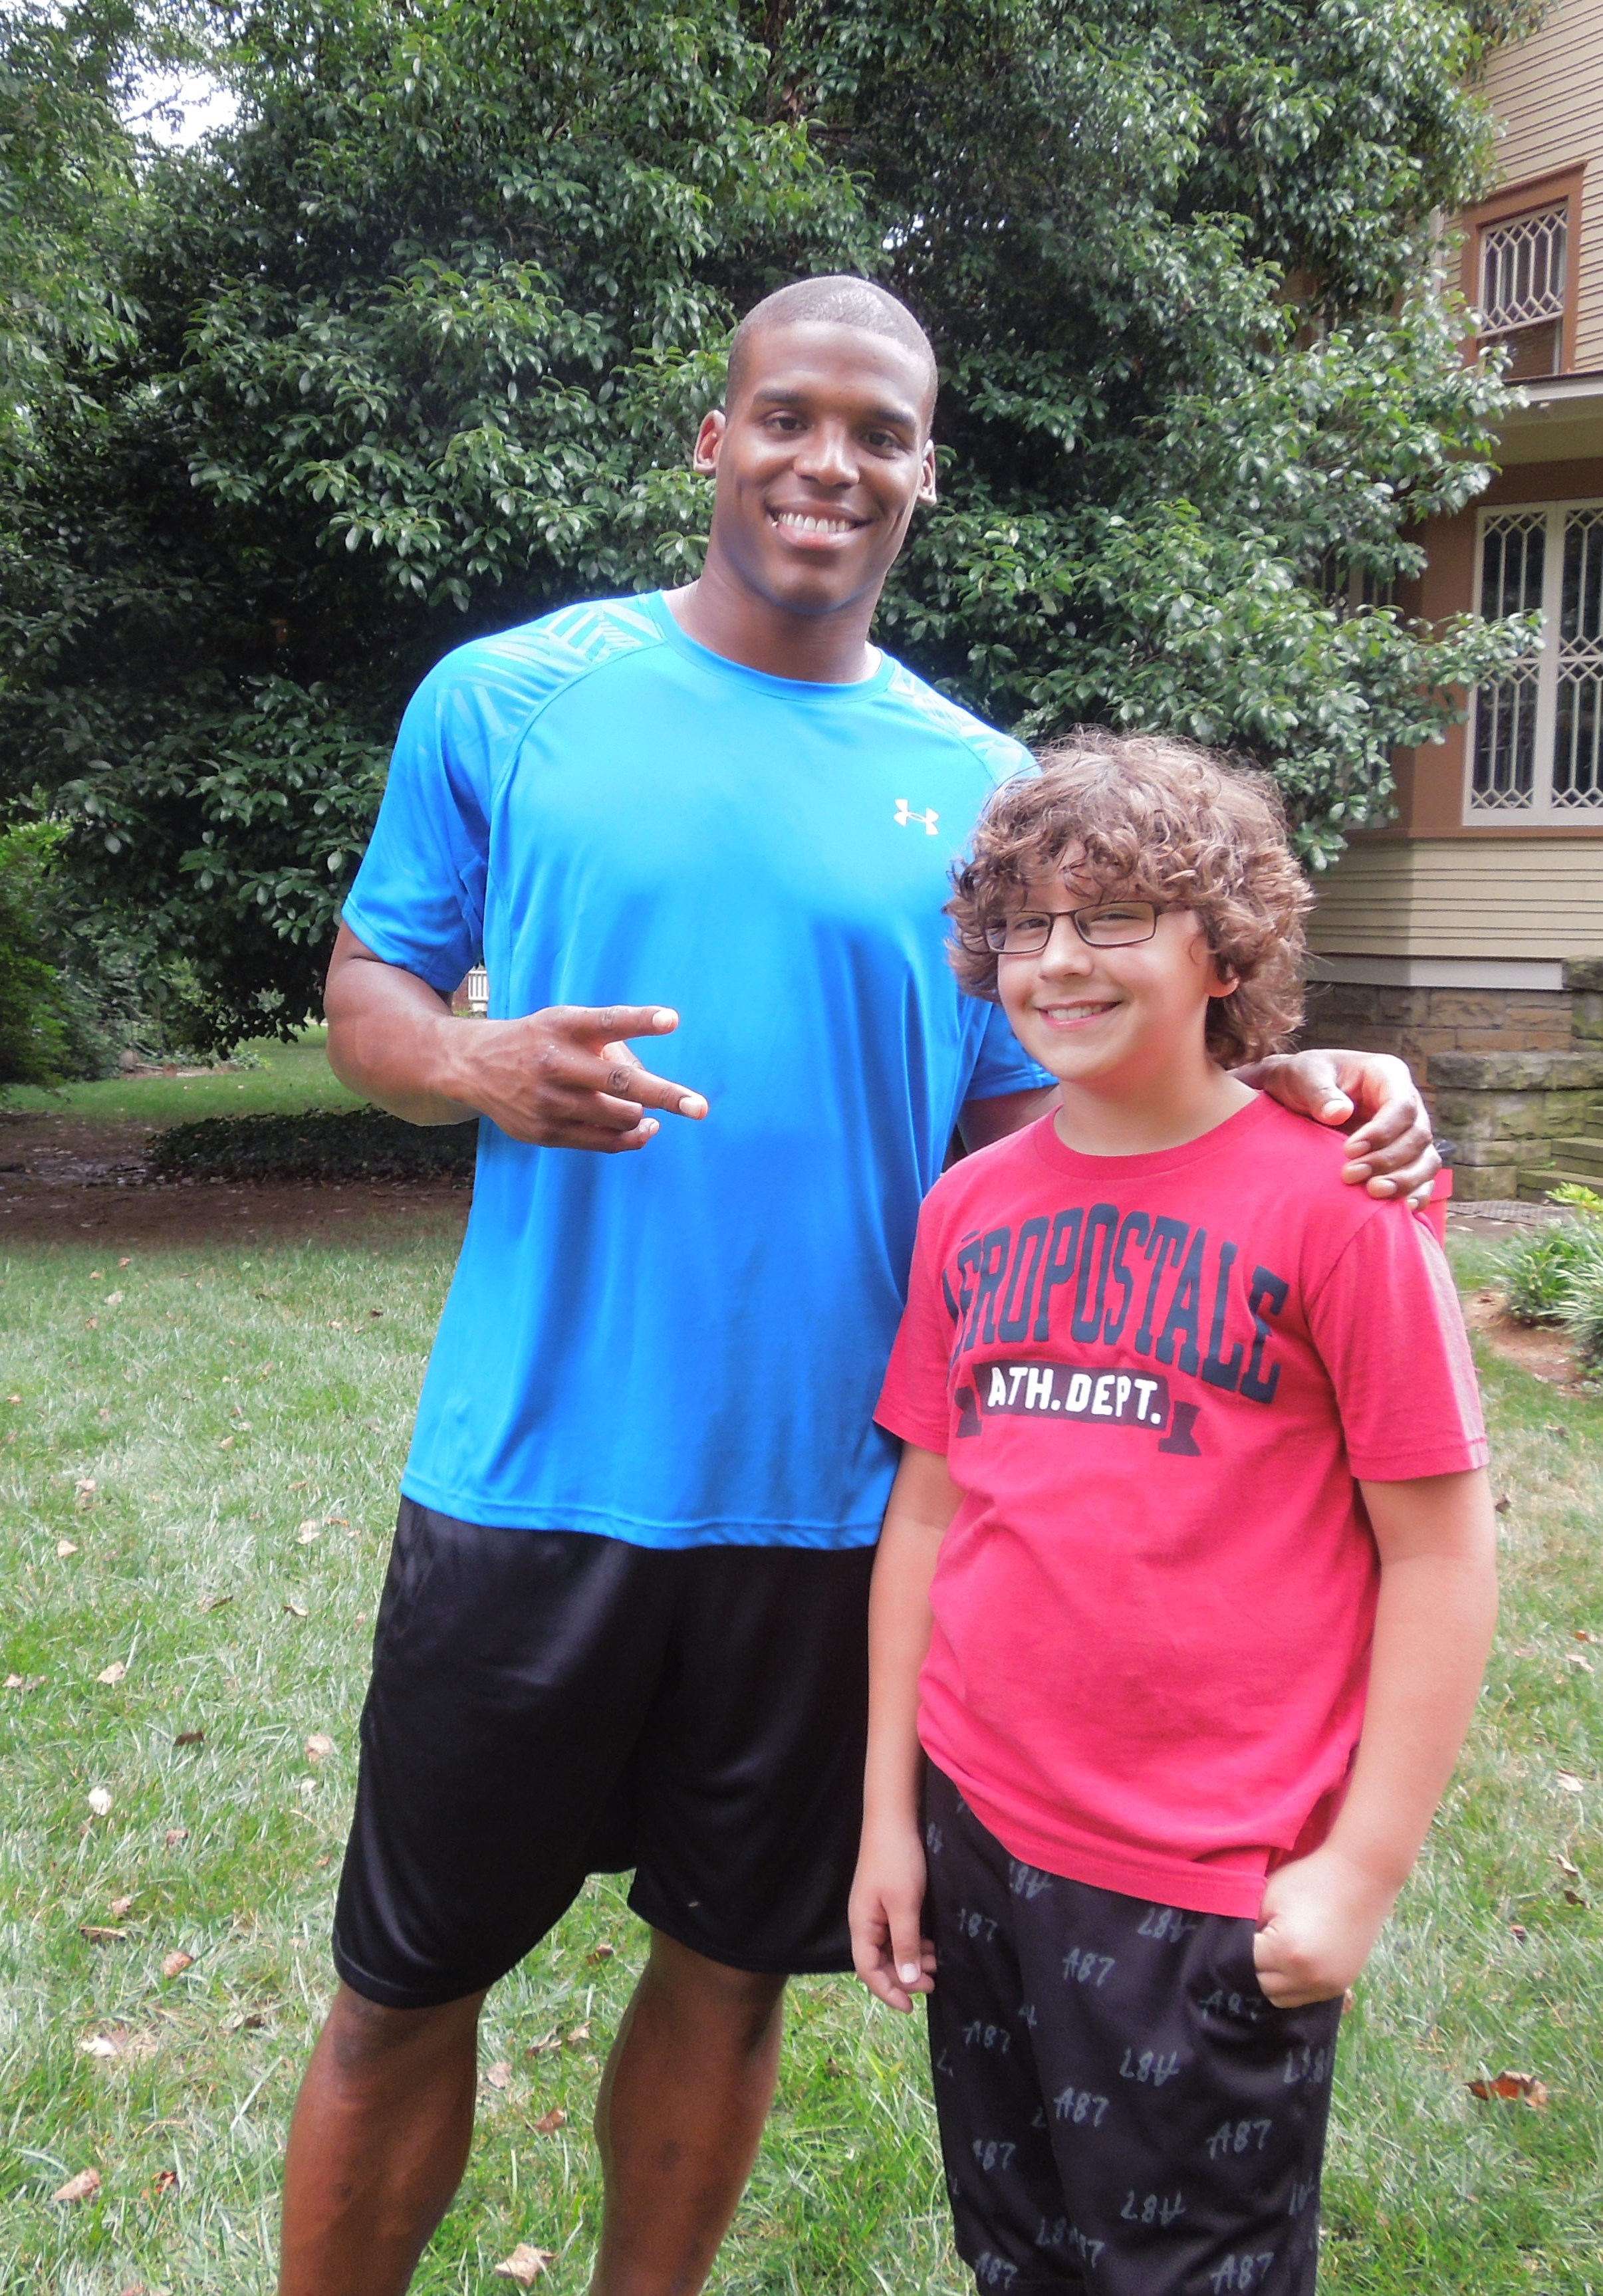 Me and Cam Newton